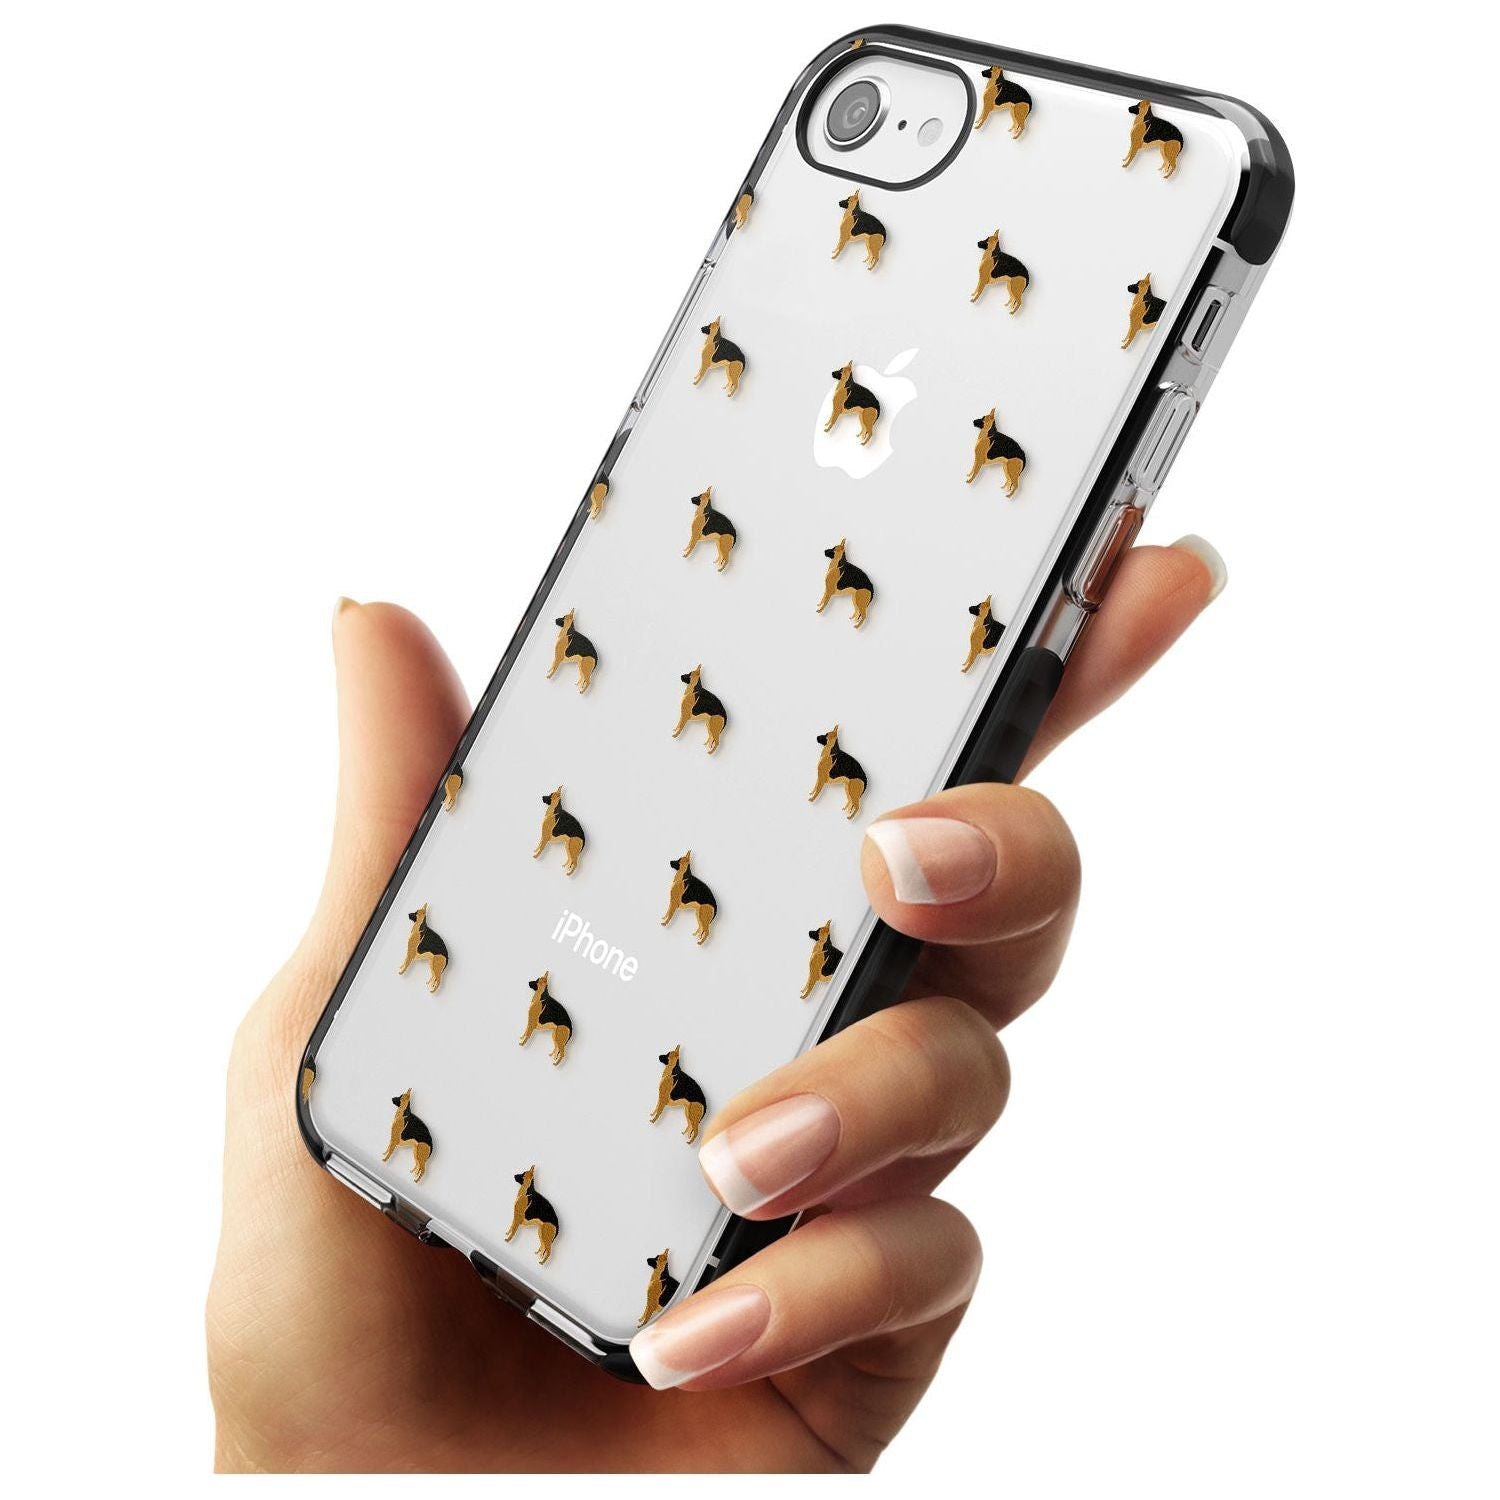 German Sherpard Dog Pattern Clear Black Impact Phone Case for iPhone SE 8 7 Plus